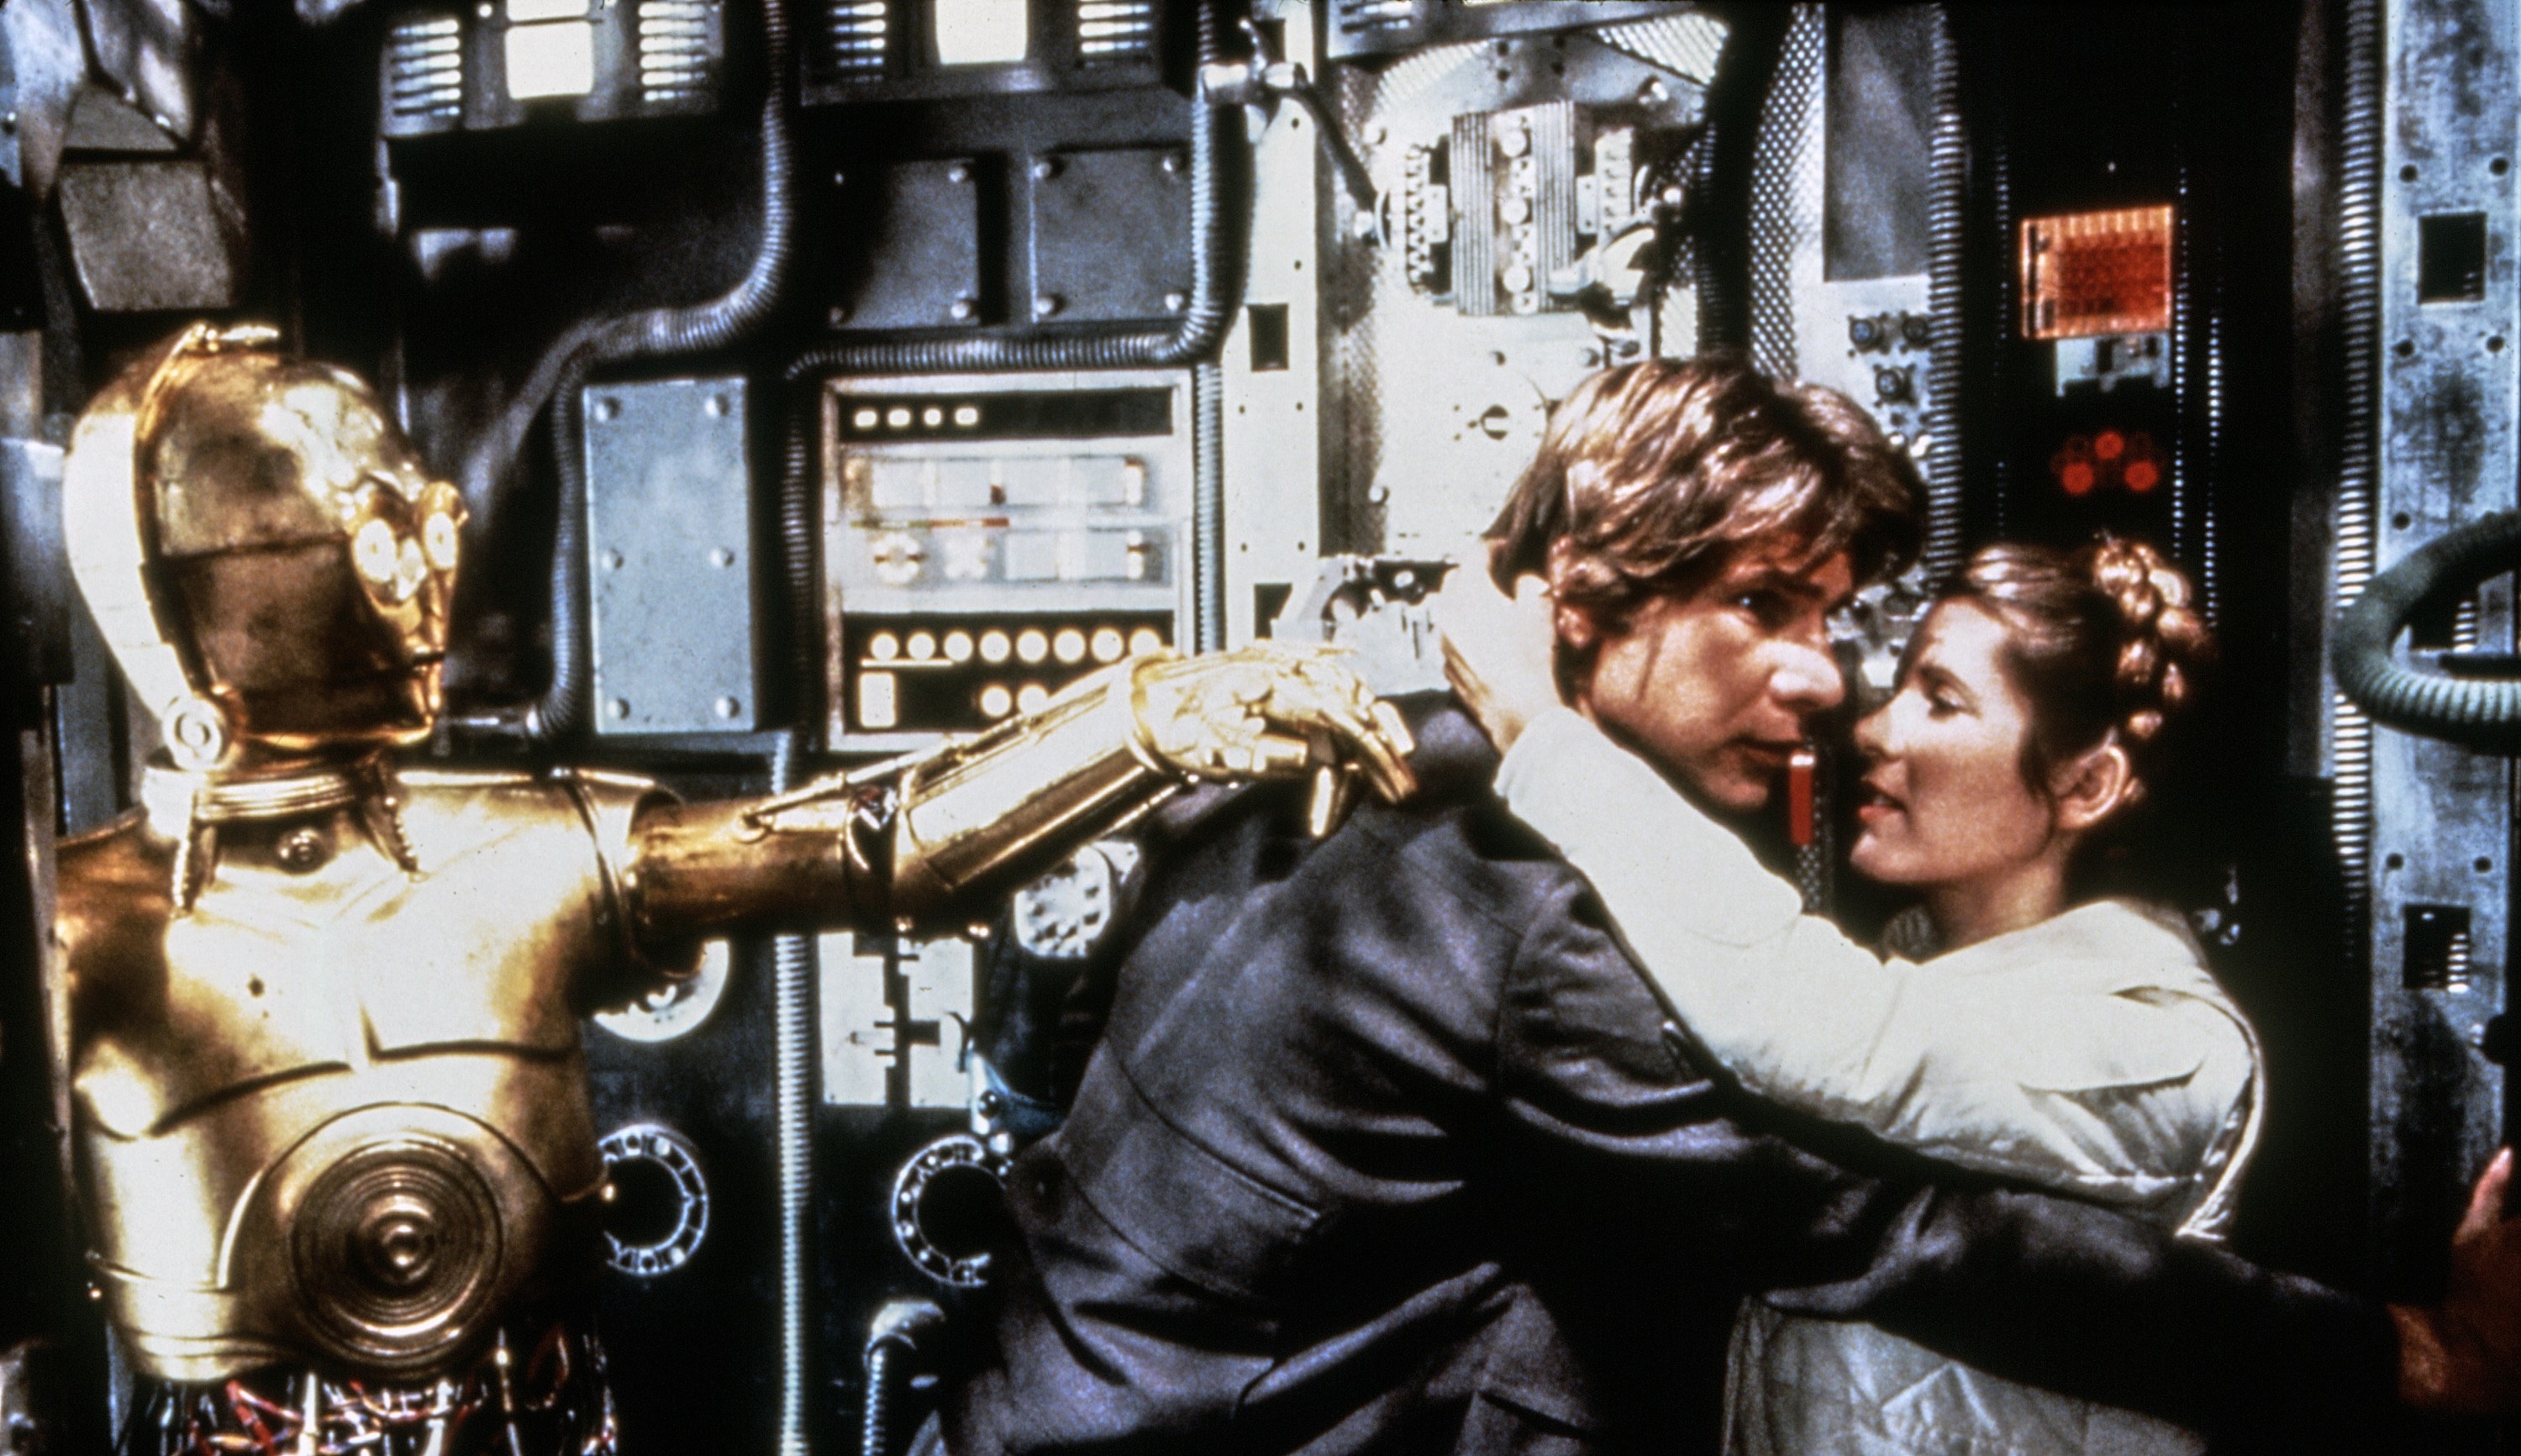 Leia and Han embrace, while C-3PO looks on